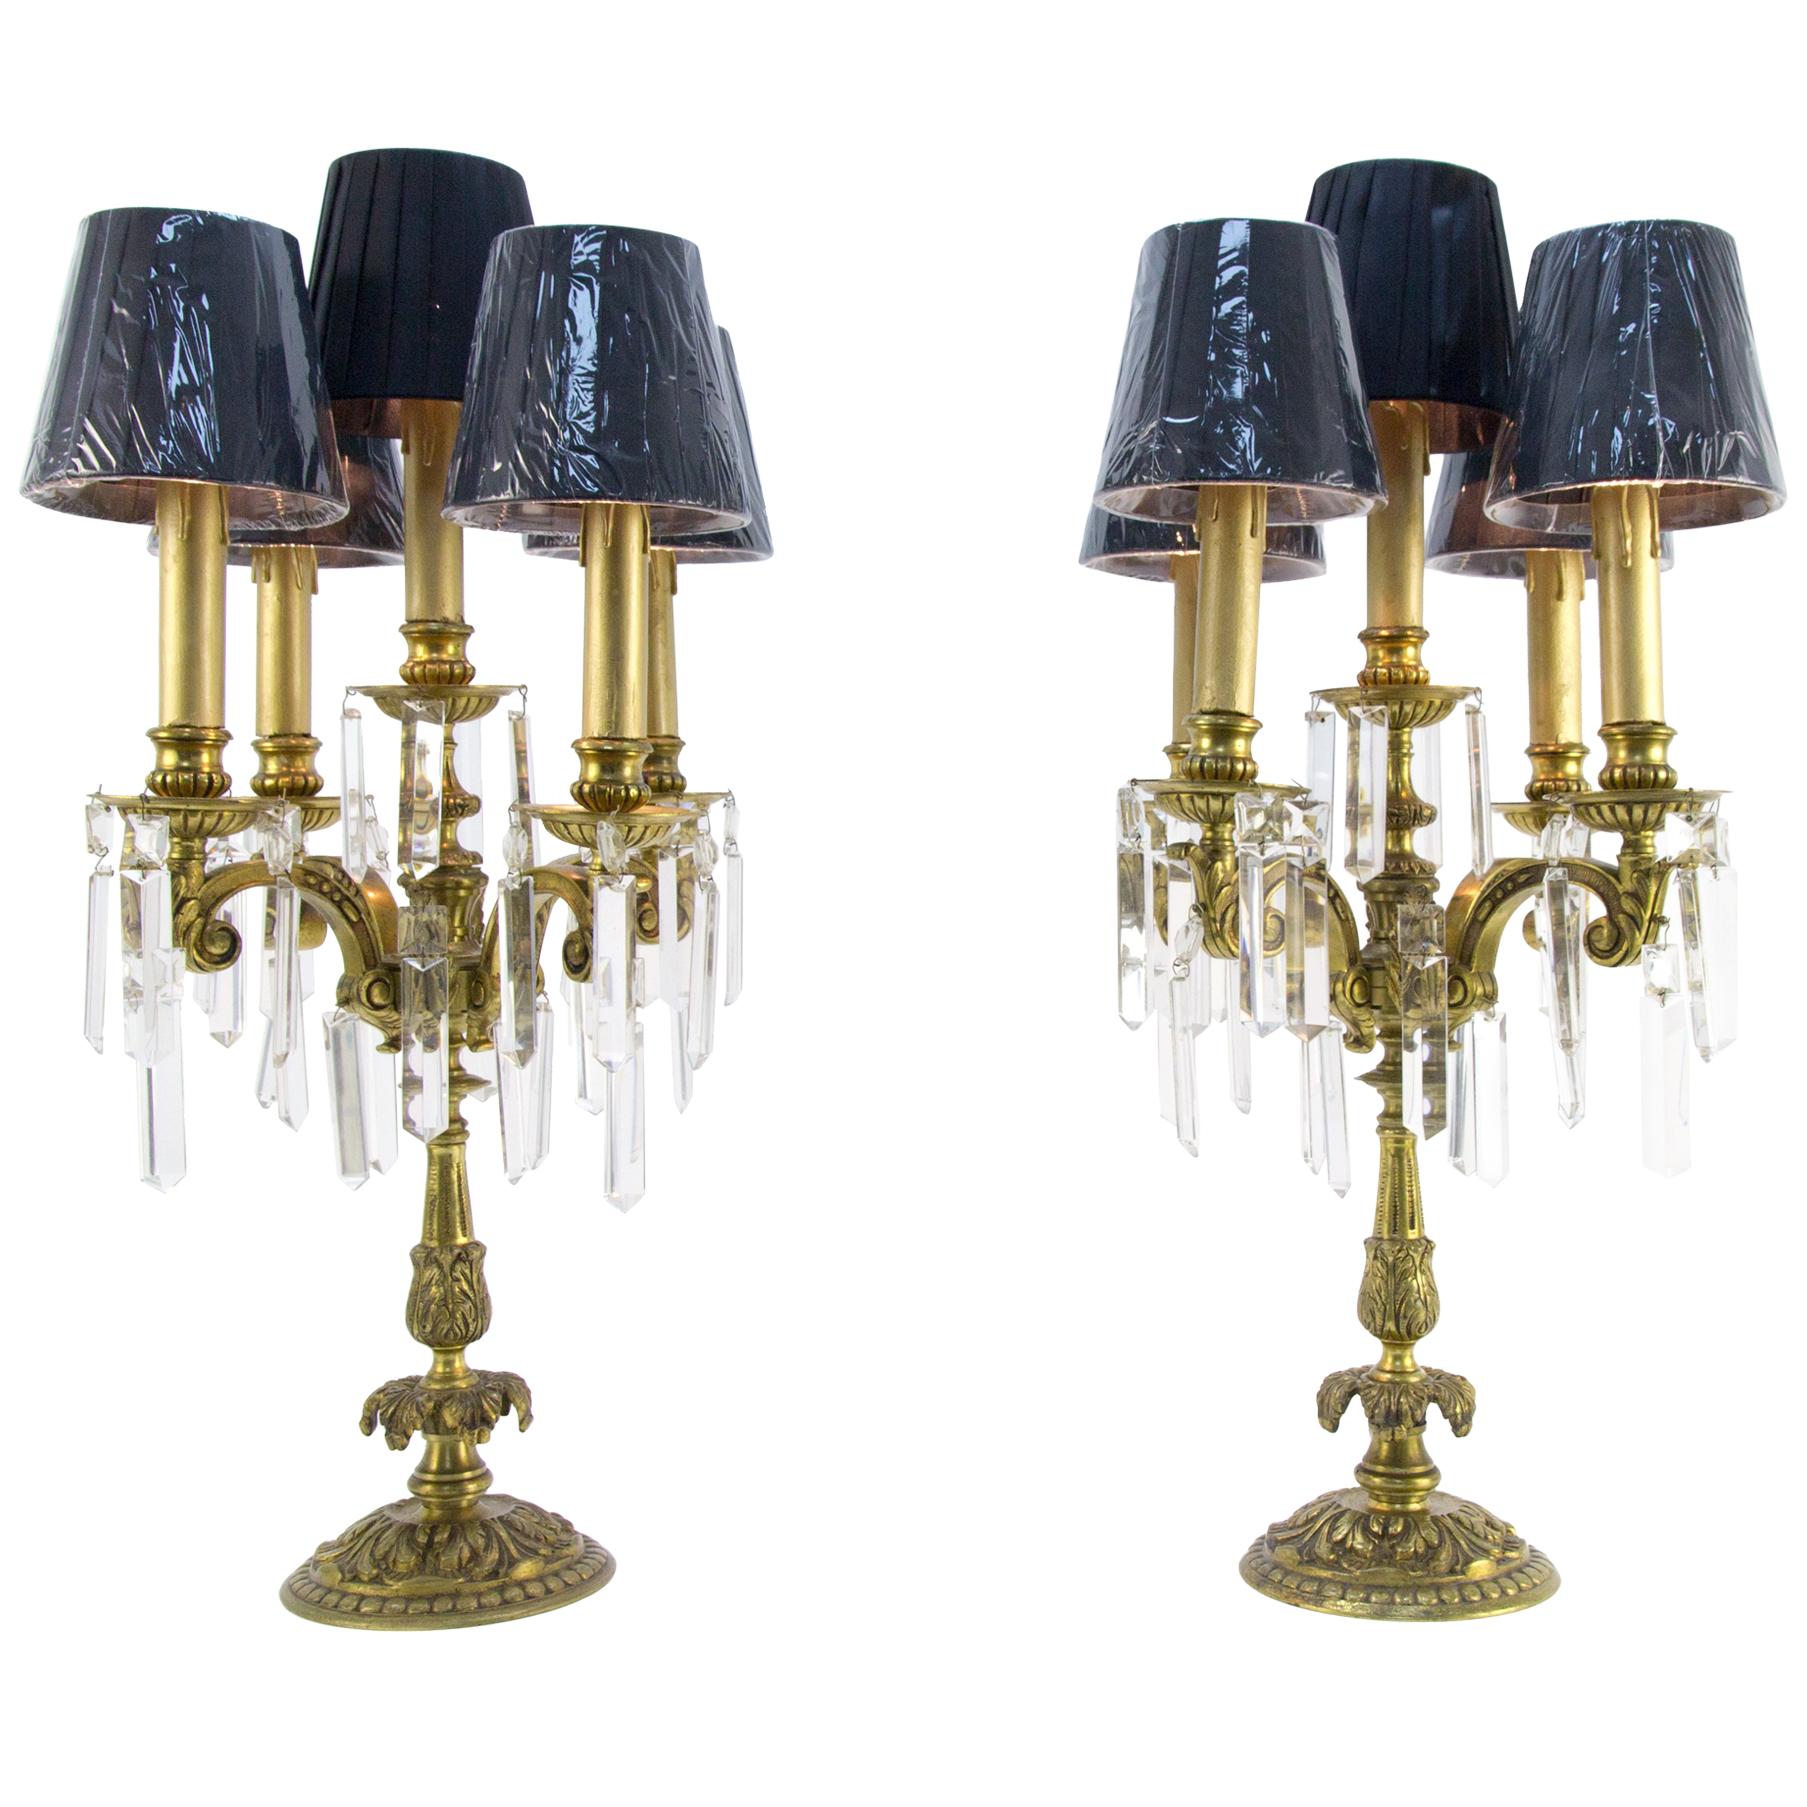 Pair of French Louis XVI Style Bronze and Crystal Candelabra Table Lamps